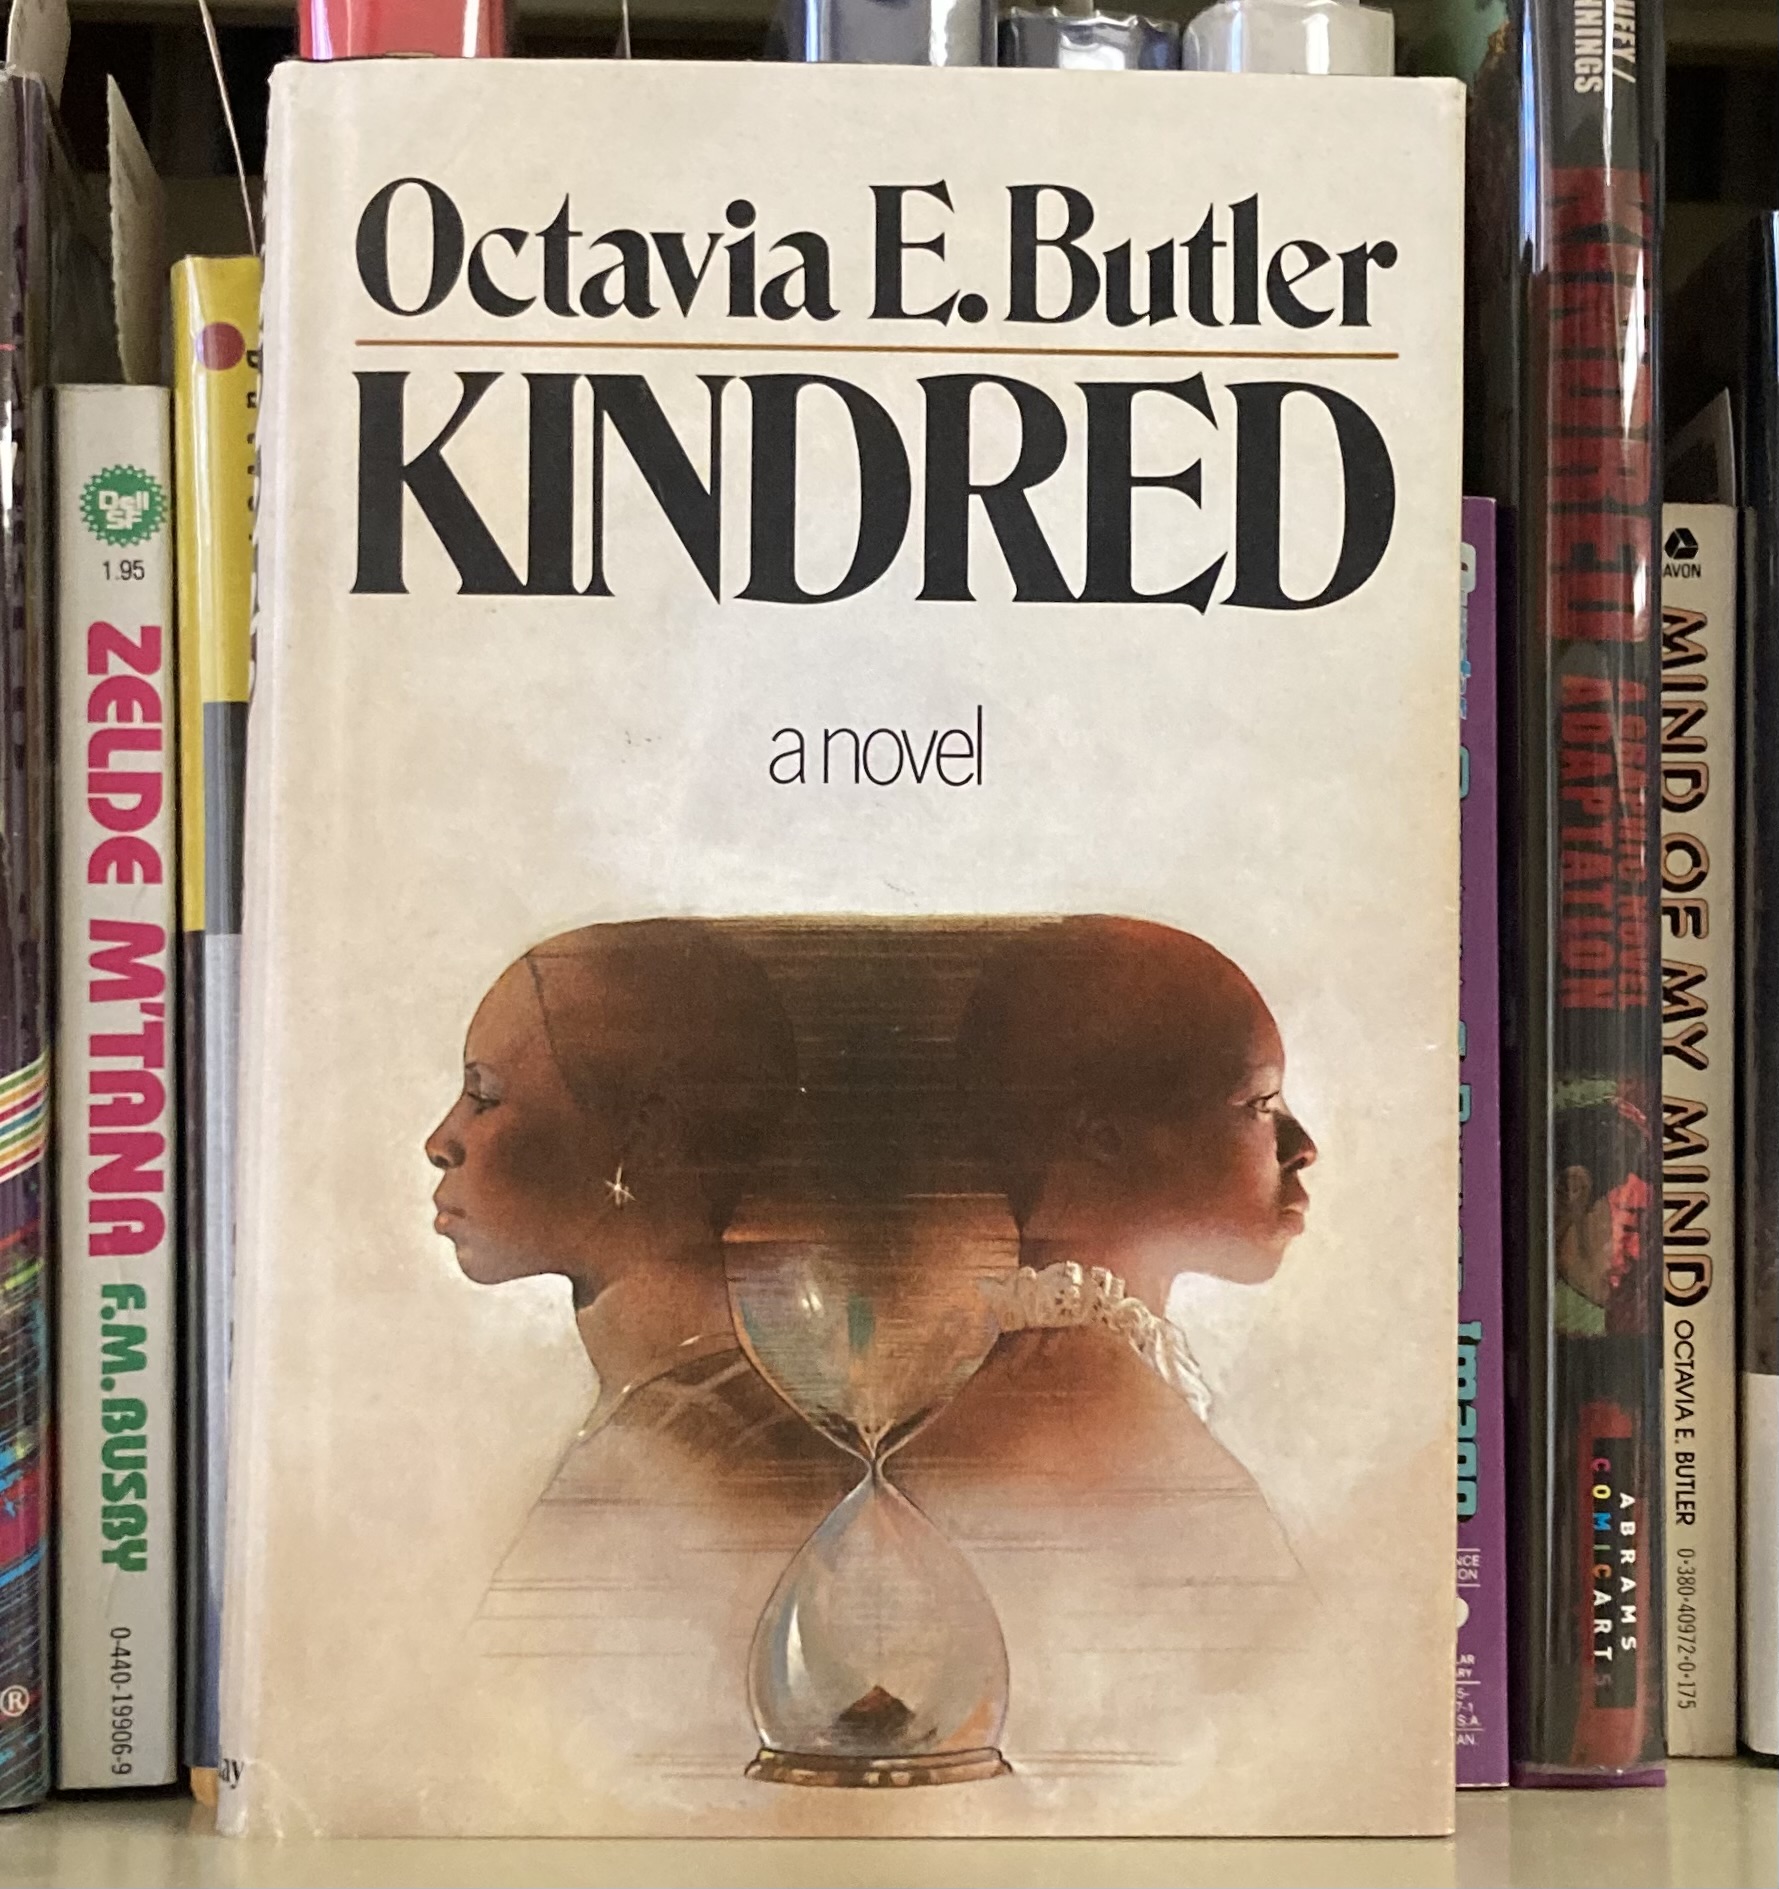 An image of a book, Kindred by Octavia E. Butler